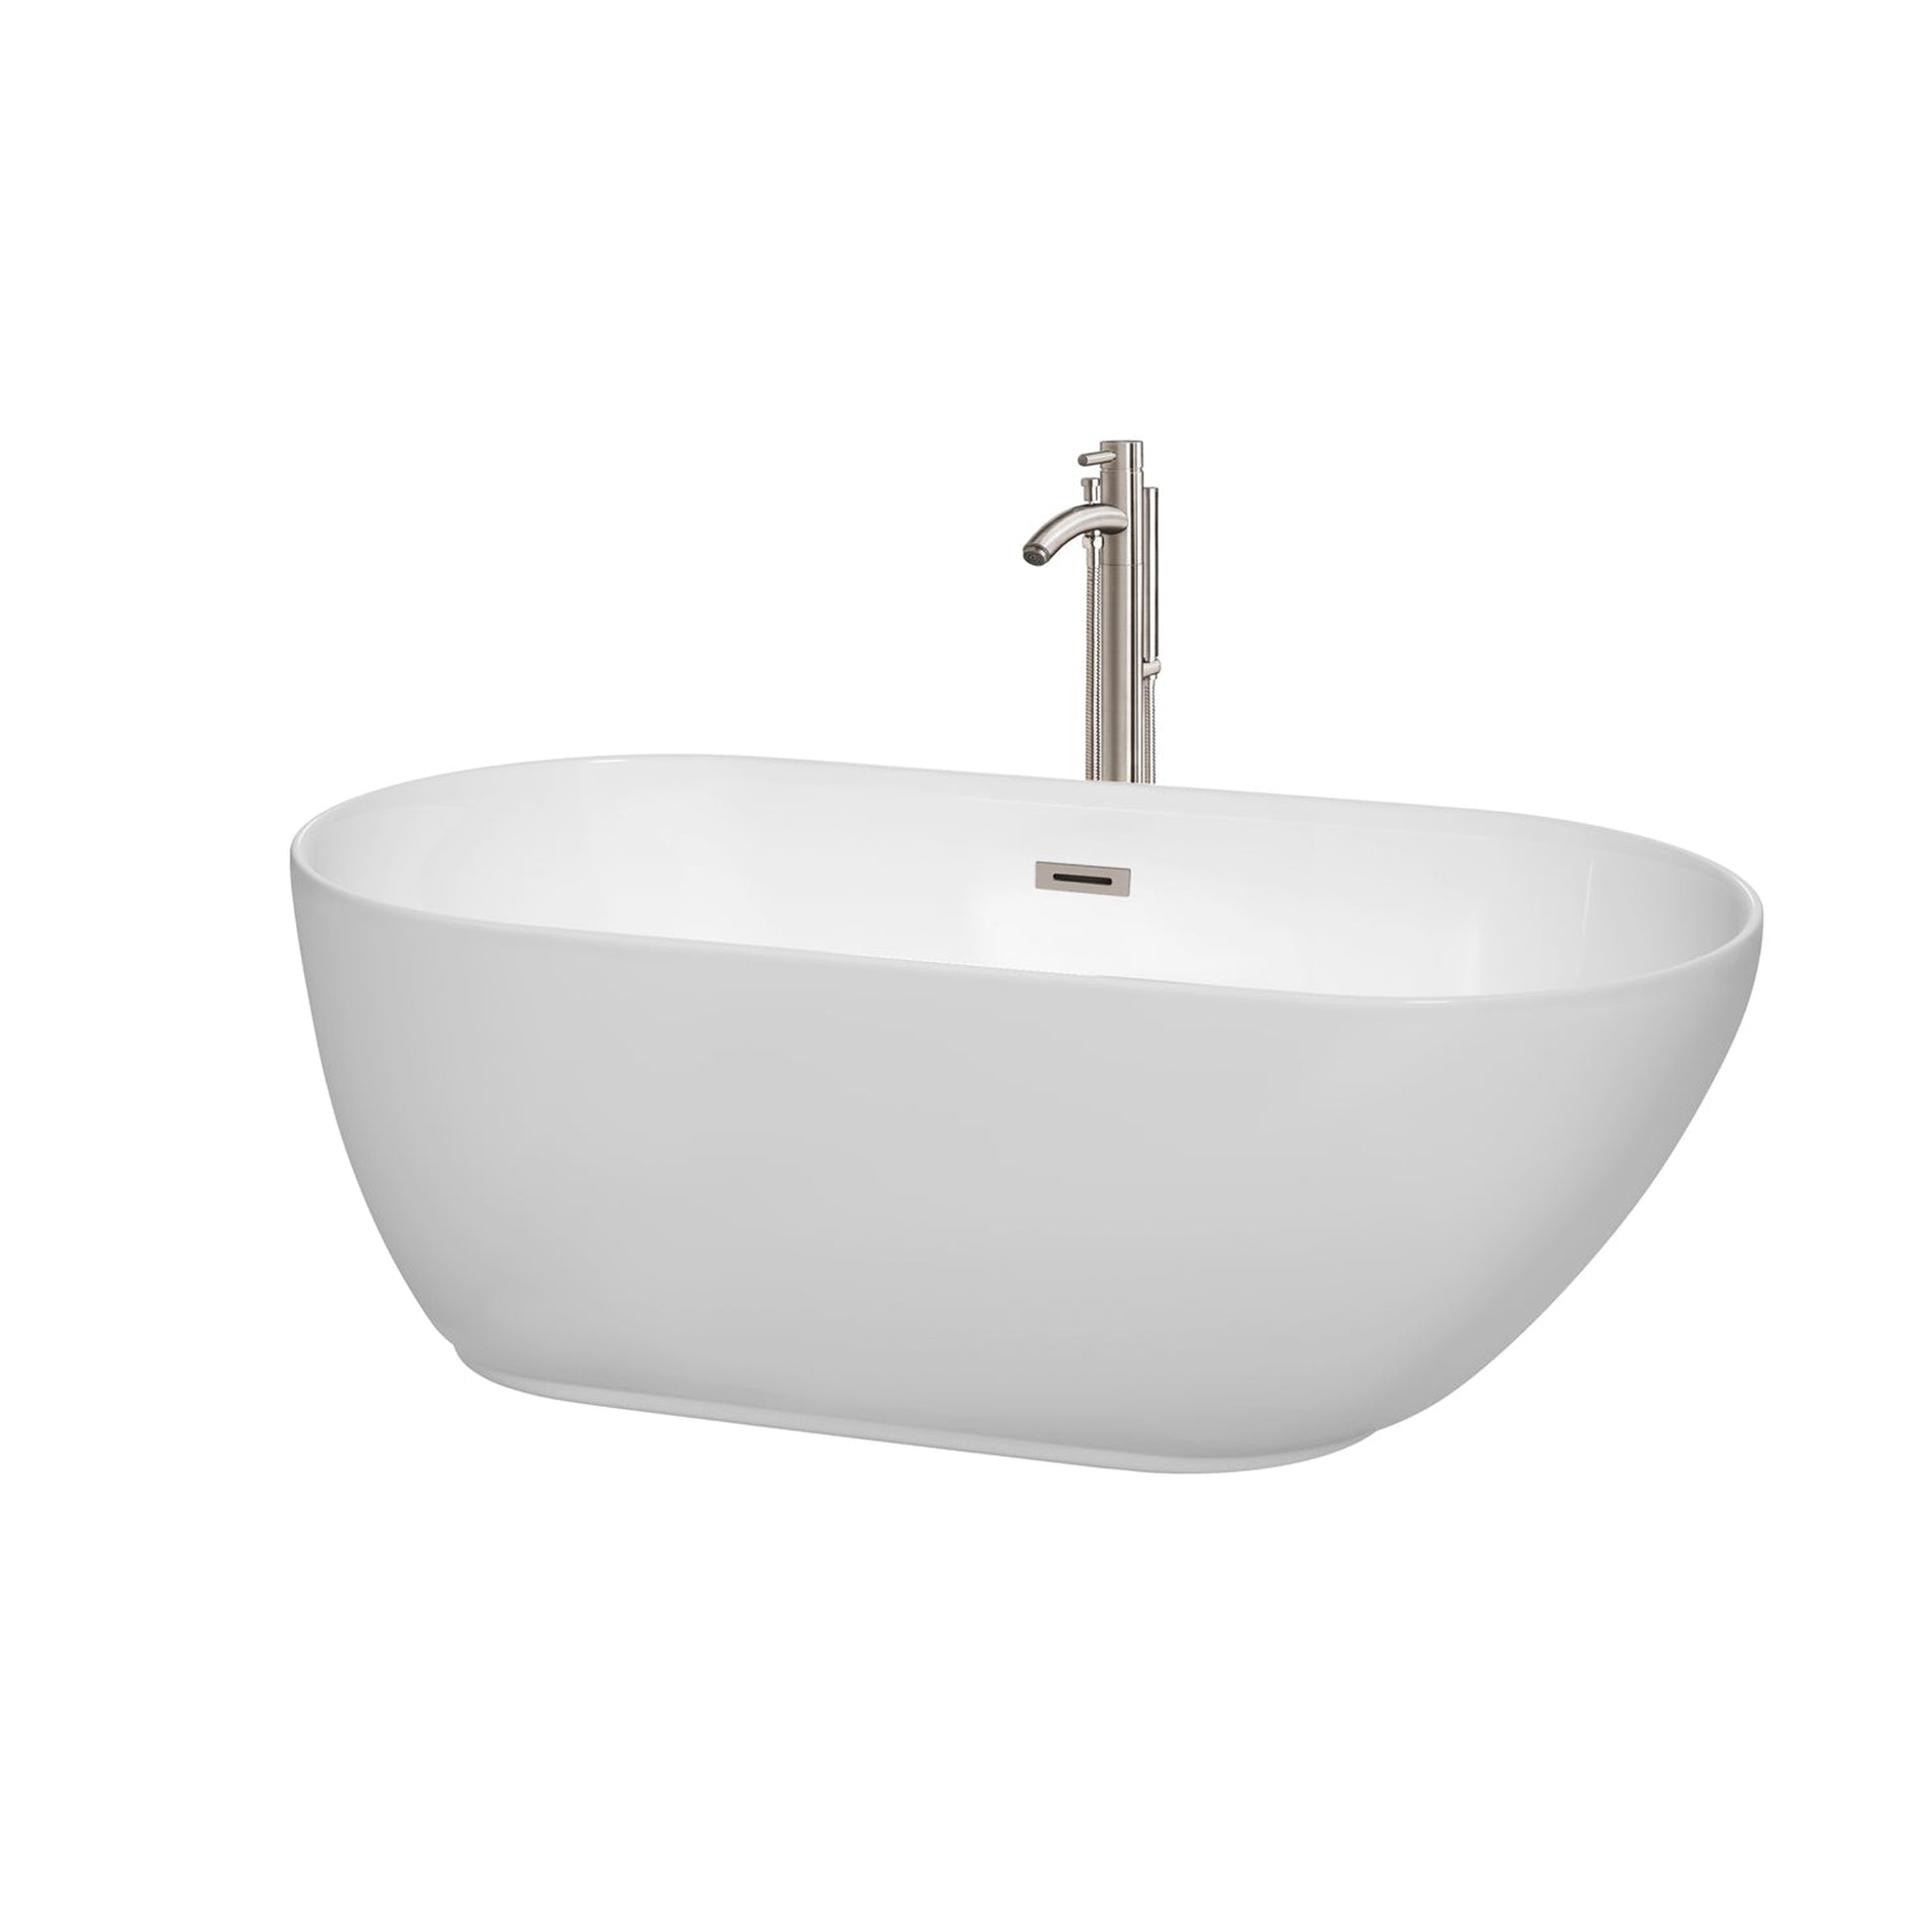 Wyndham Collection Melissa 60" Freestanding Bathtub in White With Floor Mounted Faucet, Drain and Overflow Trim in Brushed Nickel